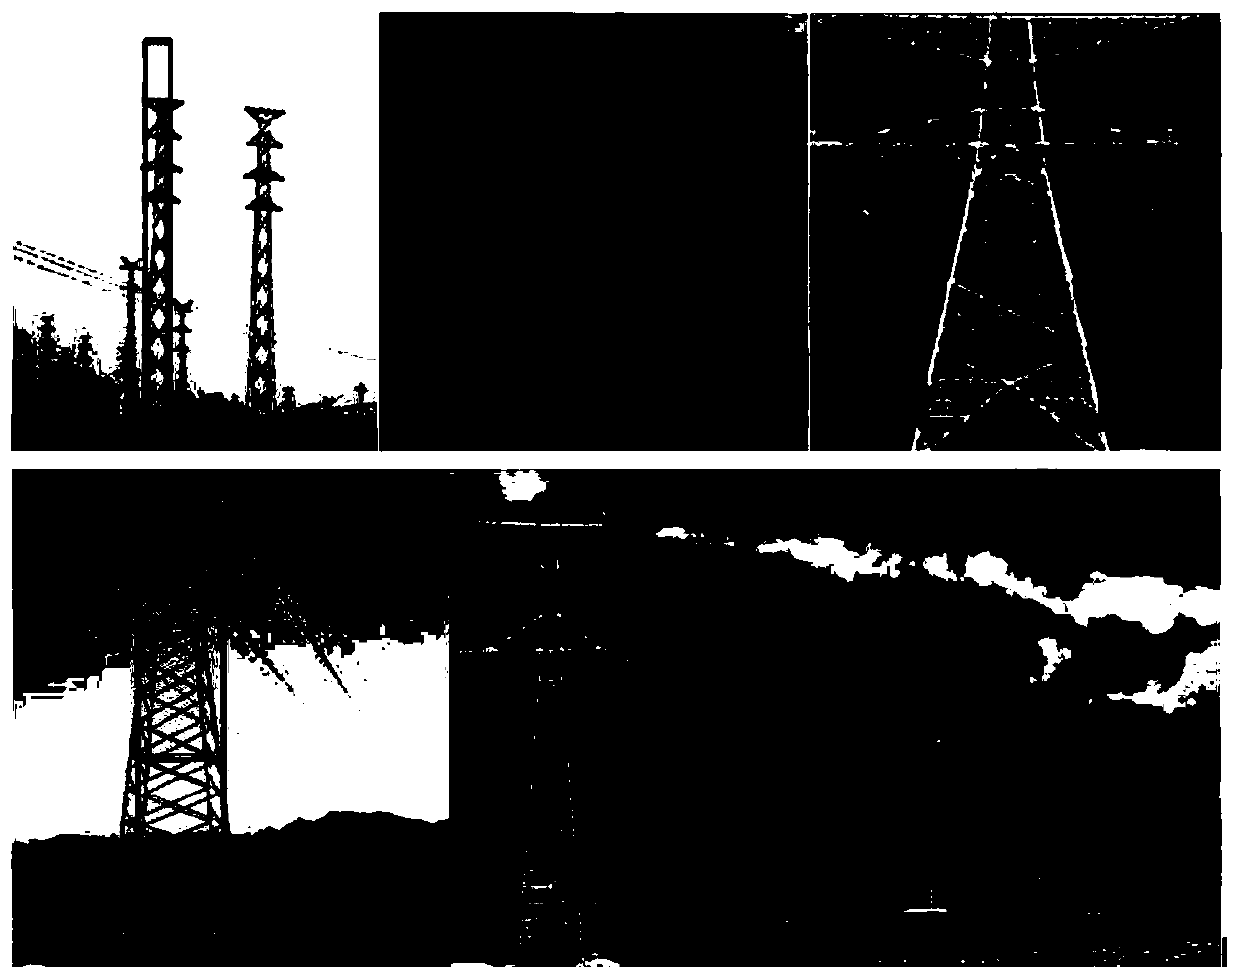 Vision-based power transmission line tower online identification and inclination detection method